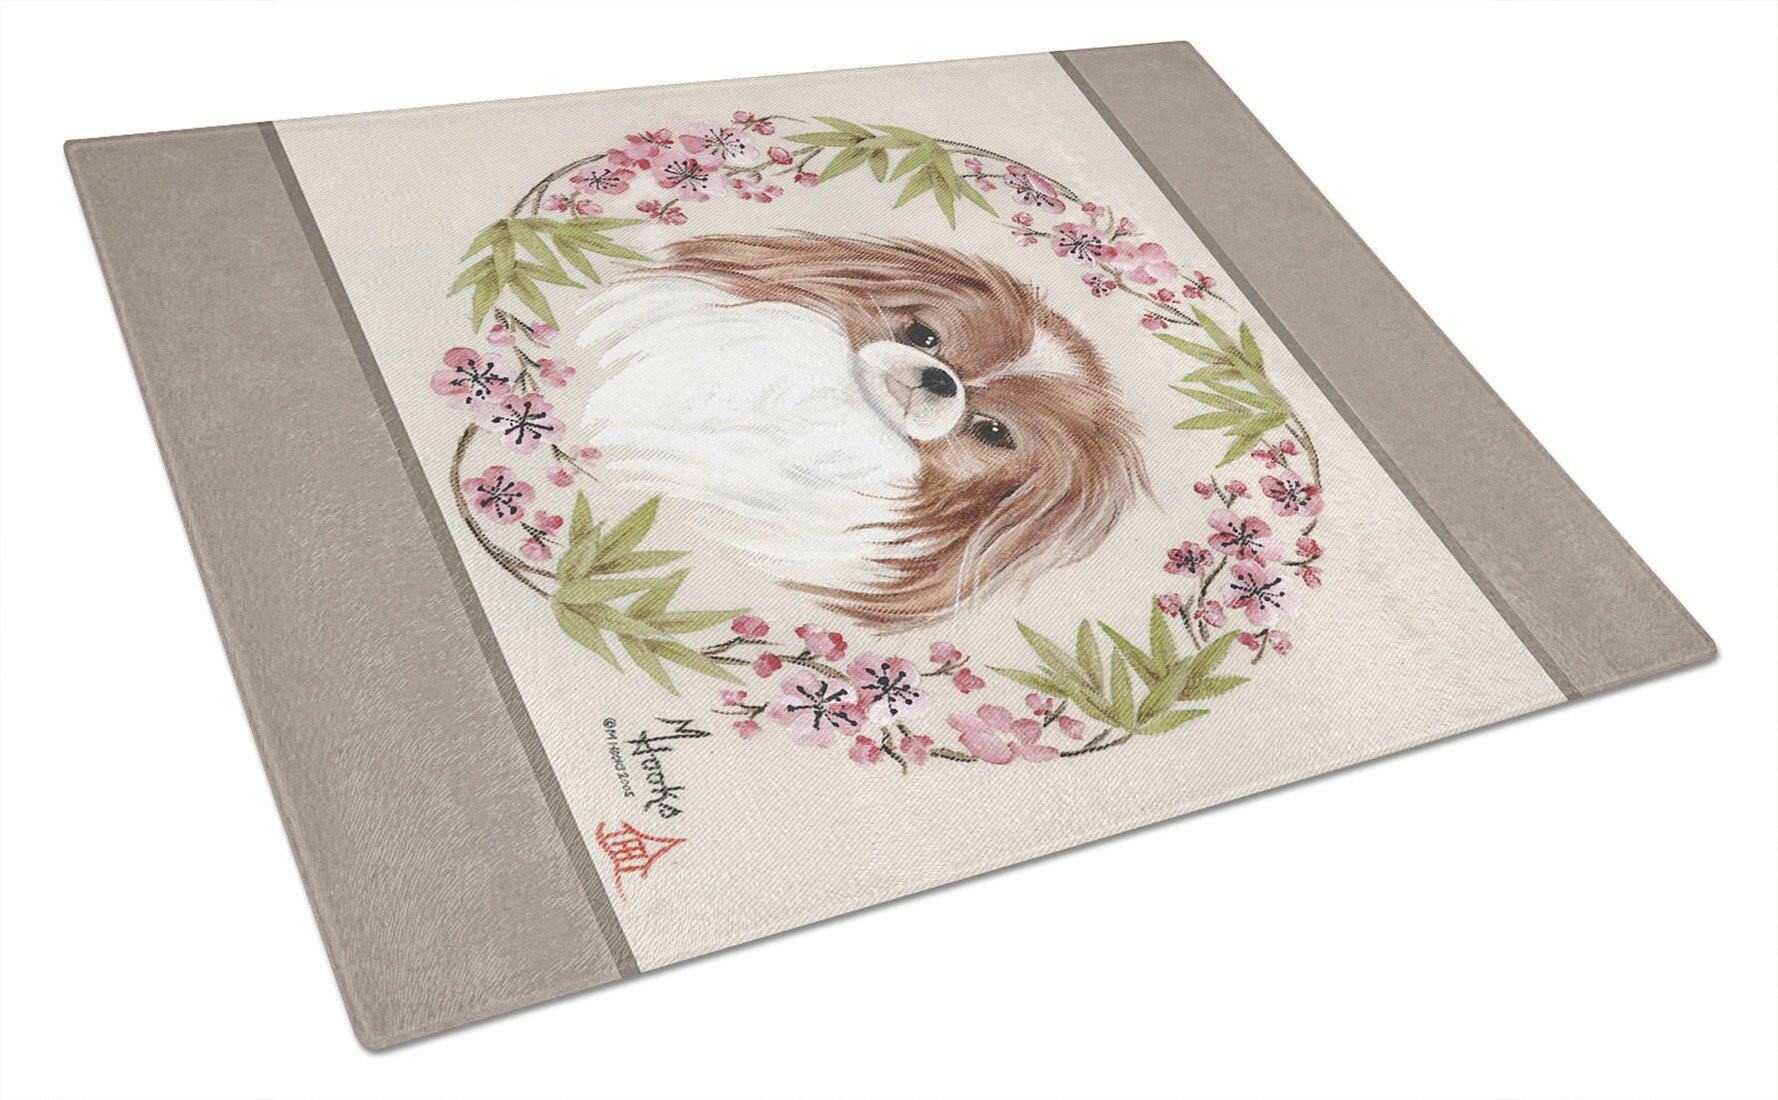 Japanese Chin Wreath of Flowers Glass Cutting Board Large MH1009LCB by Caroline's Treasures